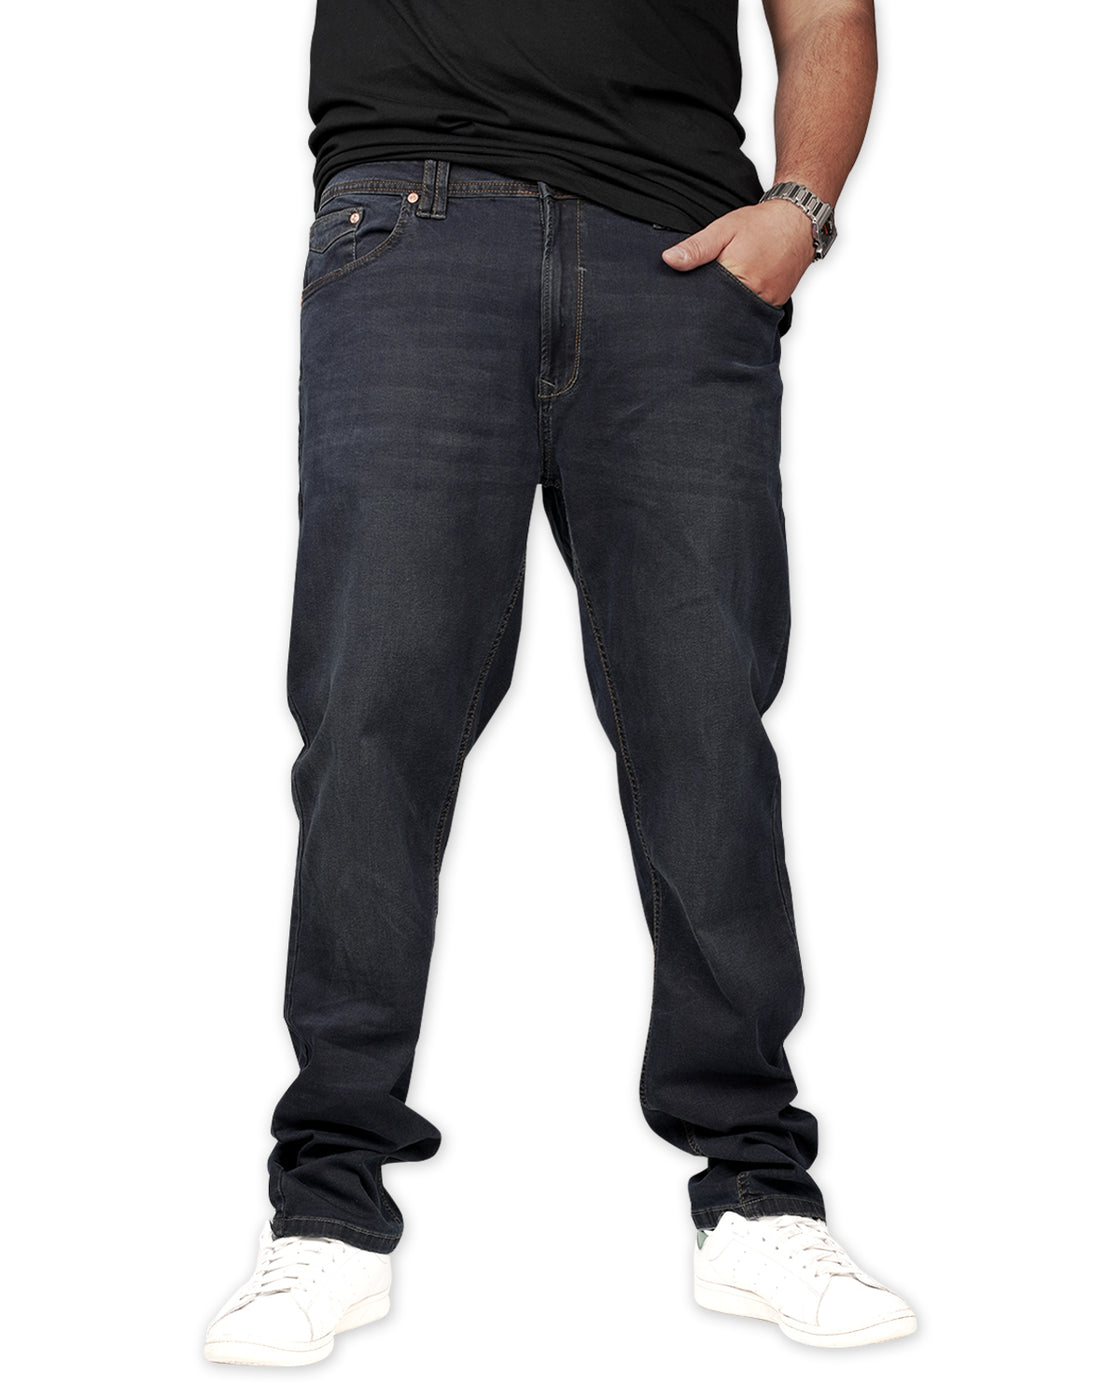 Springfield 1959 Fit Stretch Jeans by D555